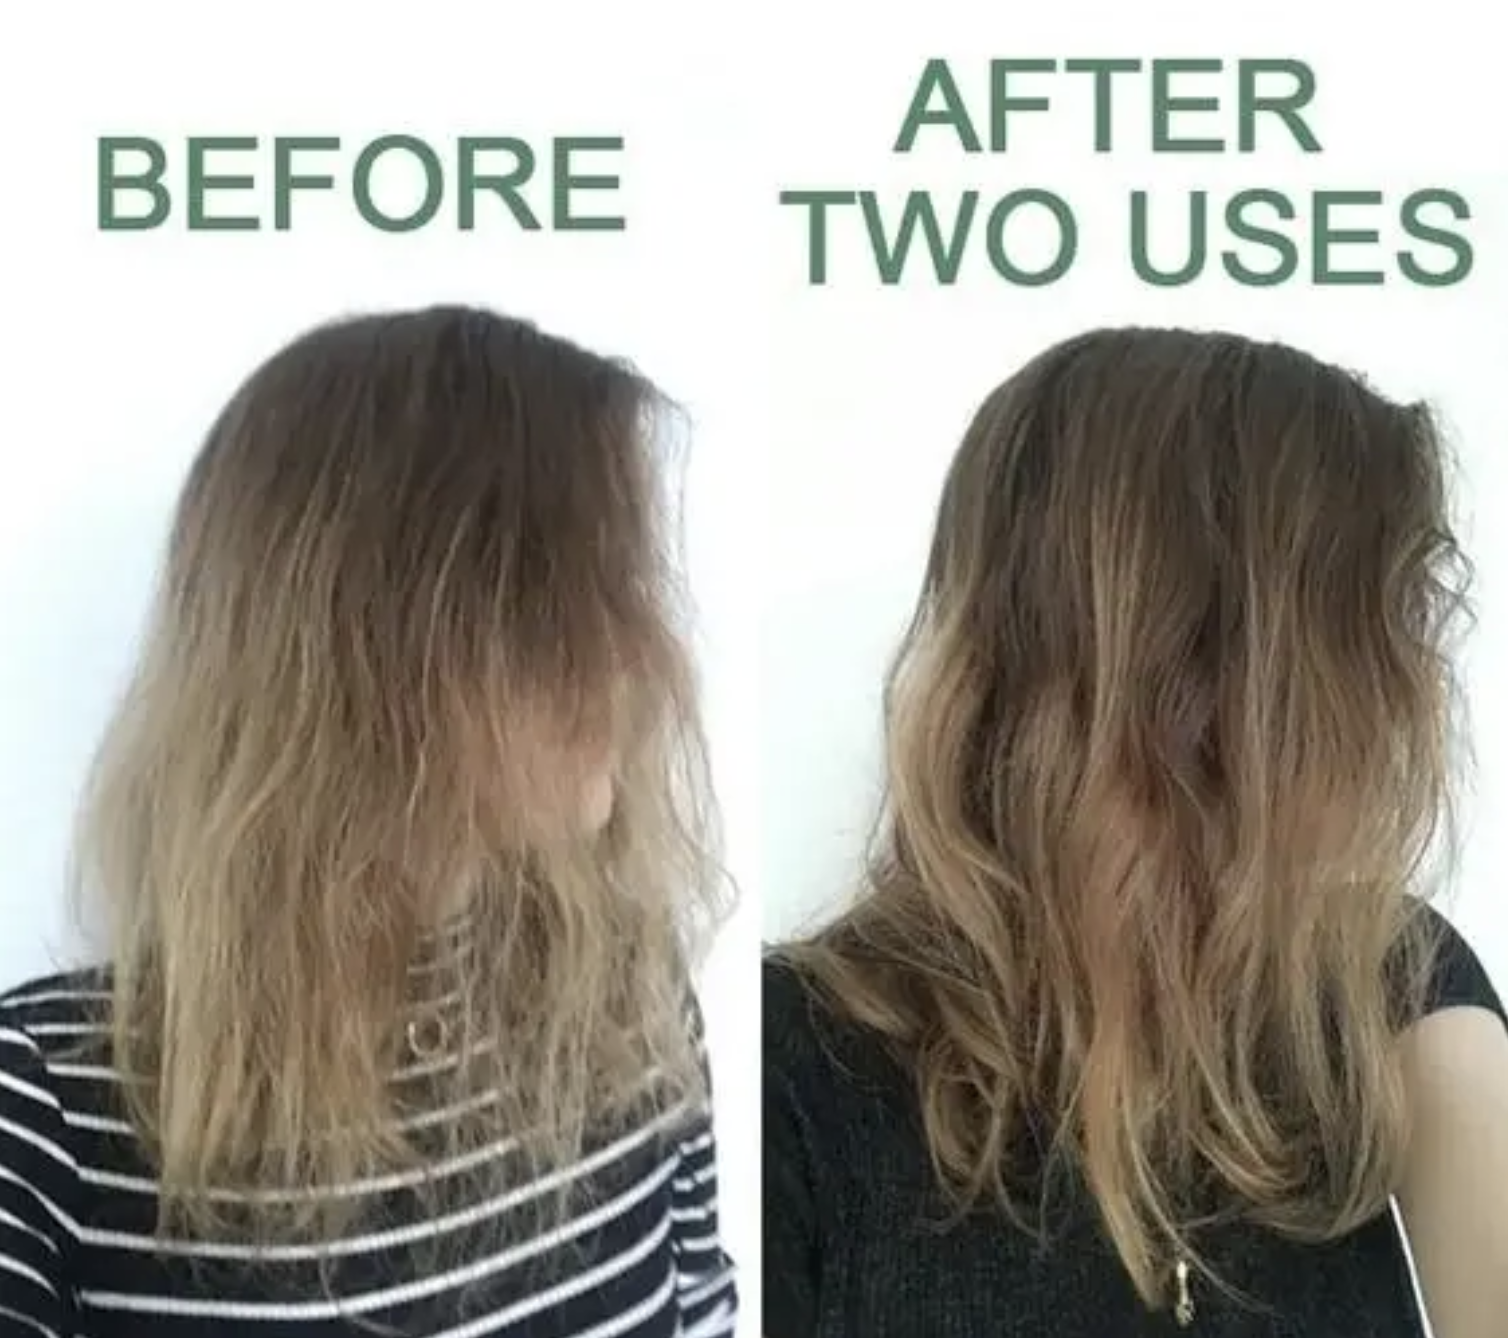 Before and after image of a BuzzFeed editor's hair, with the after image looking much shinier and curling more 